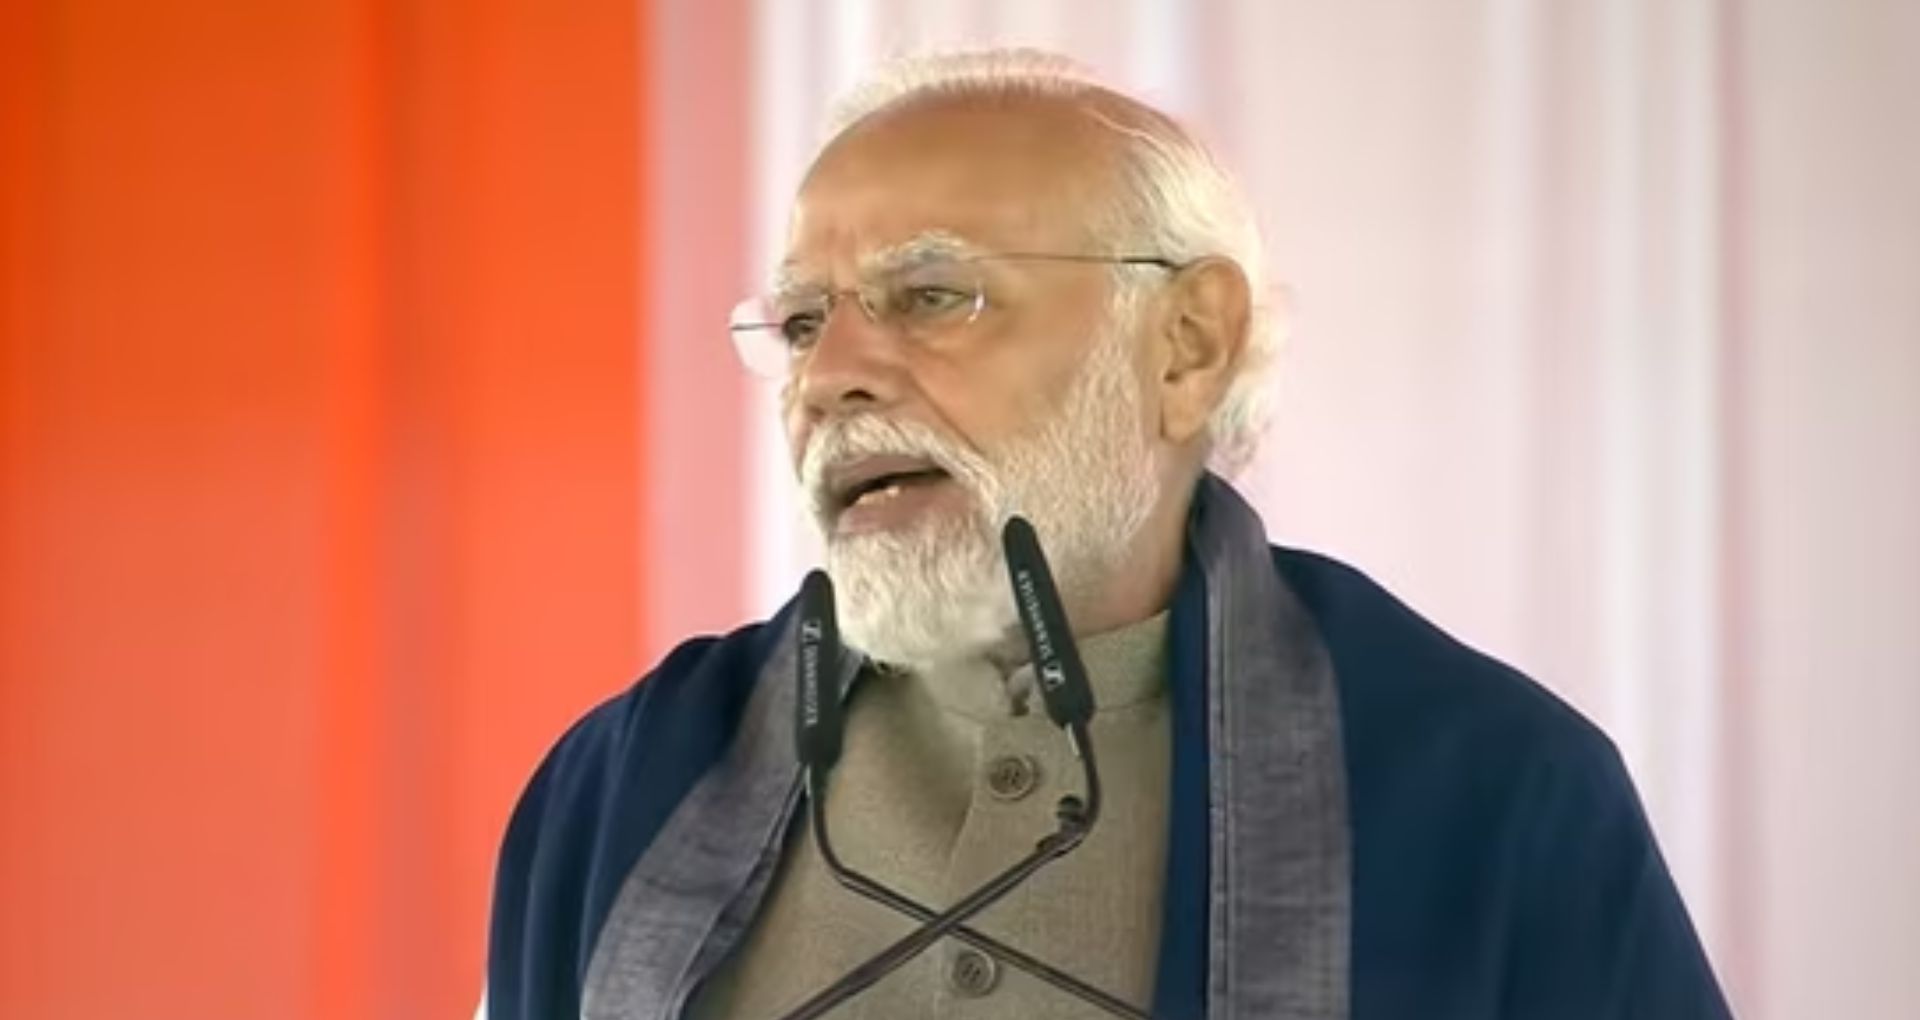 PM Modi: People using various channels to express joy around Ram Temple opening on Jan 22